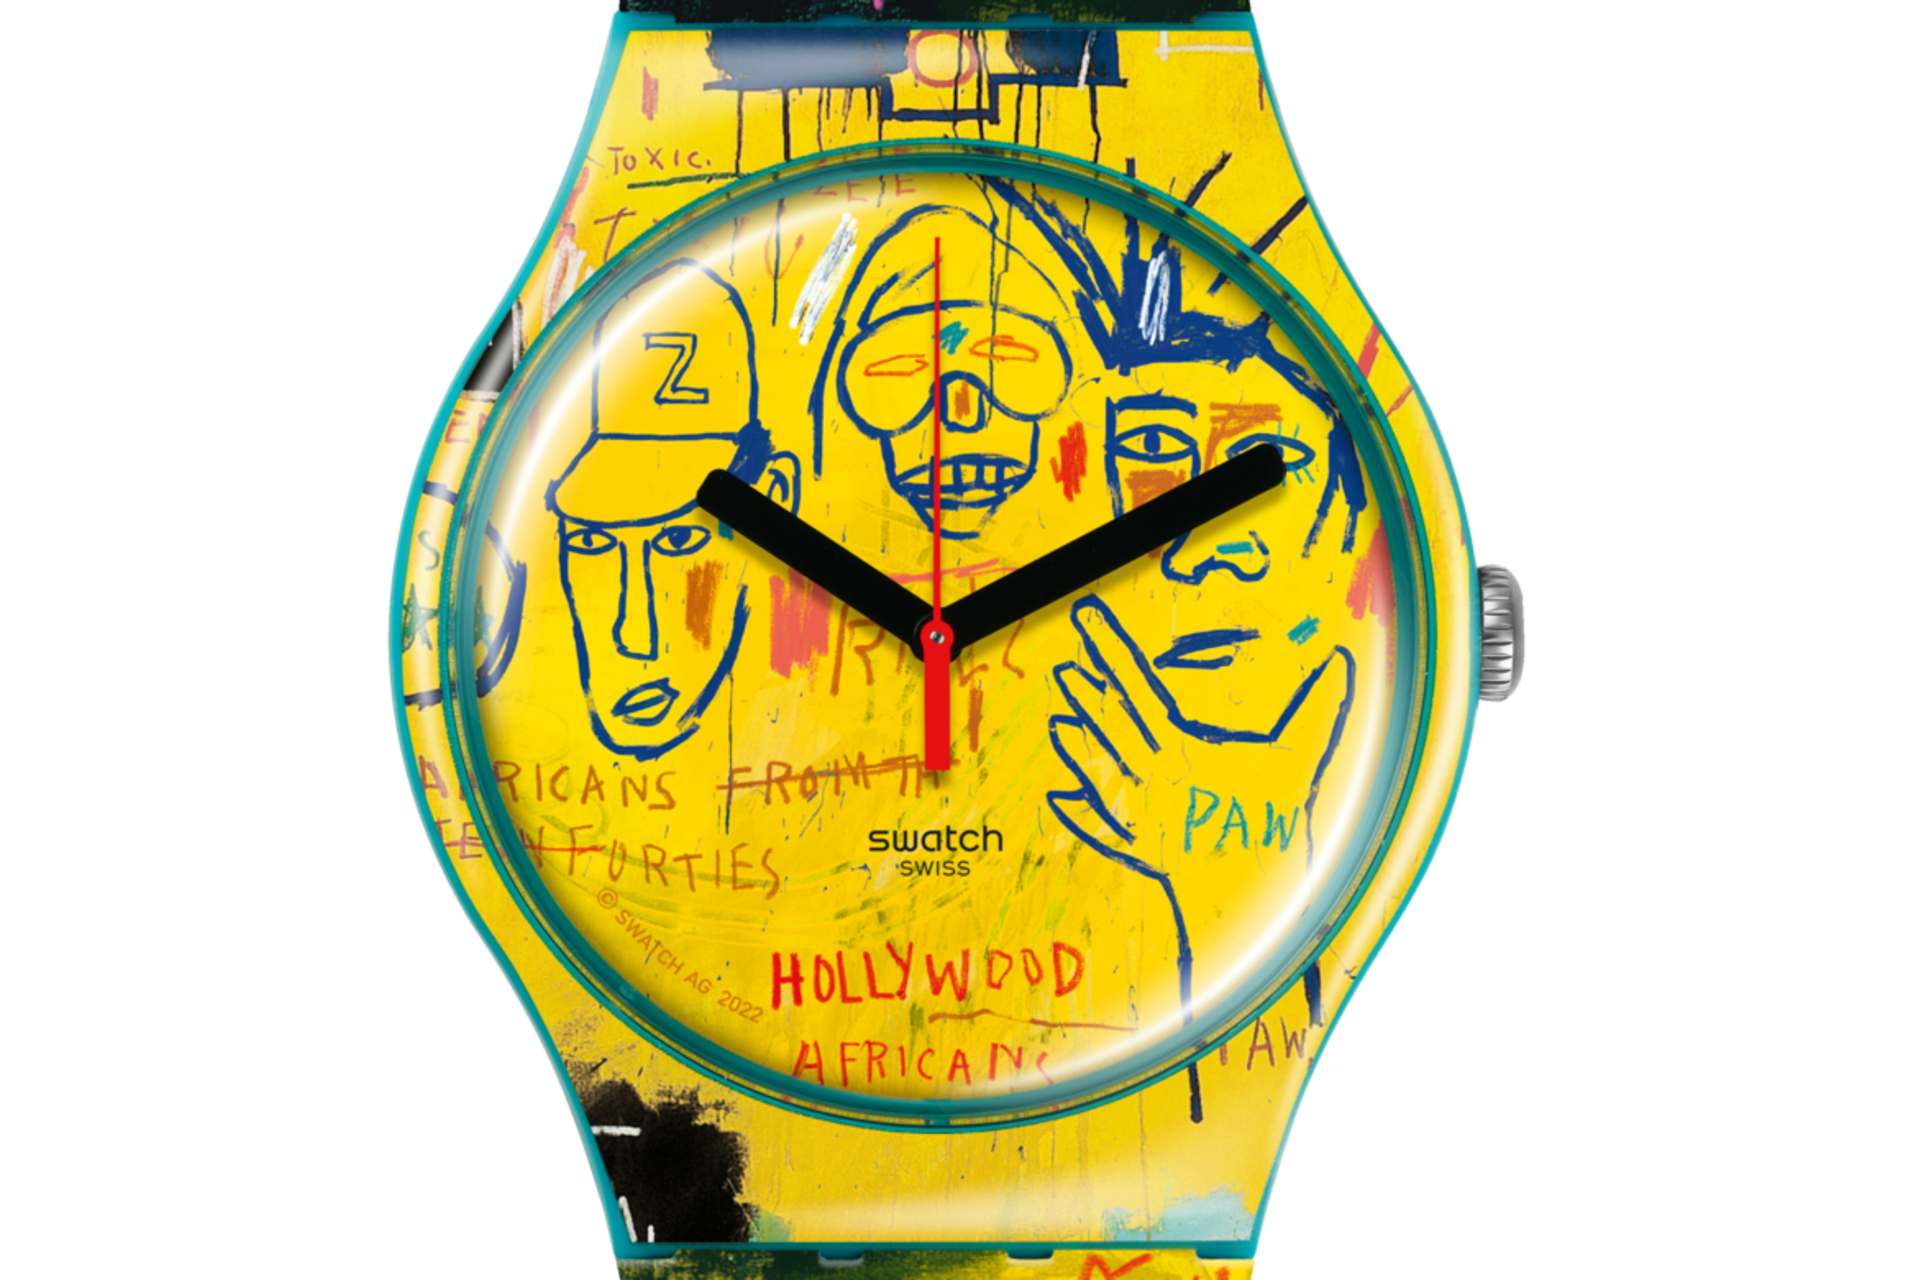 HOLLYWOOD AFRICANS BY BASQUIAT